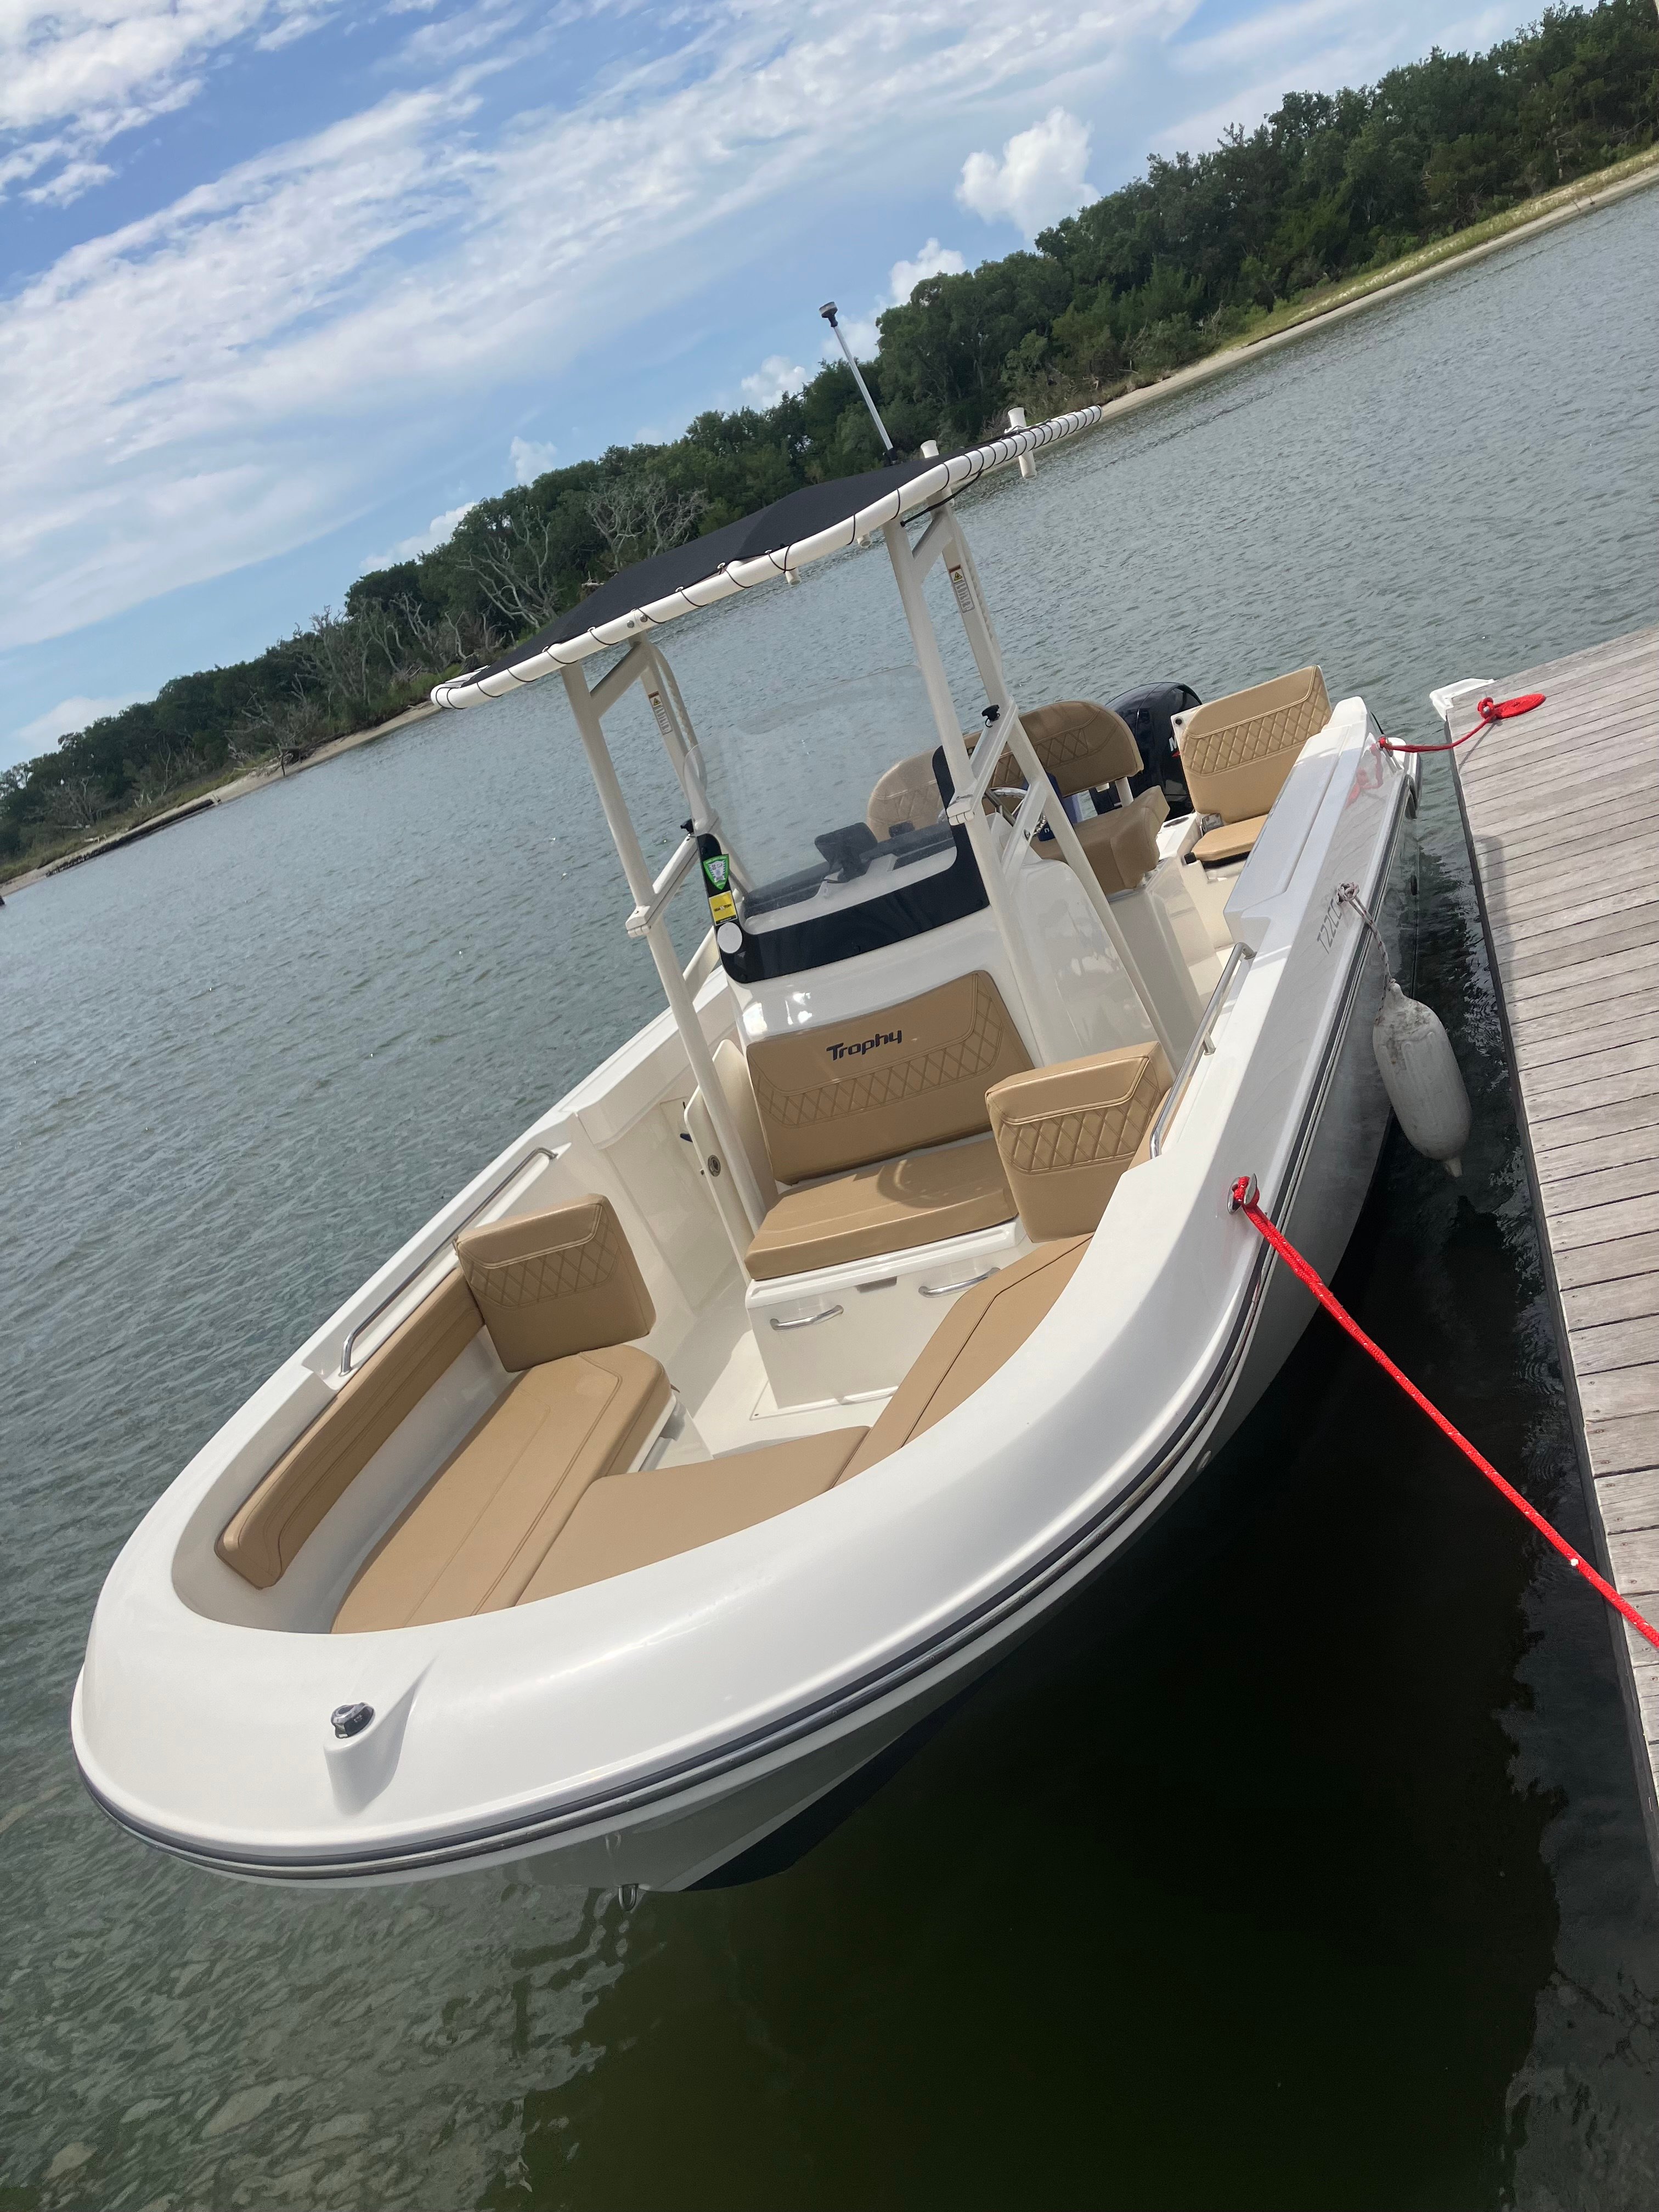 BABY ON BOARD (22FT Bayliner Trophy 22 Center Console - 150 HP~Fishing)